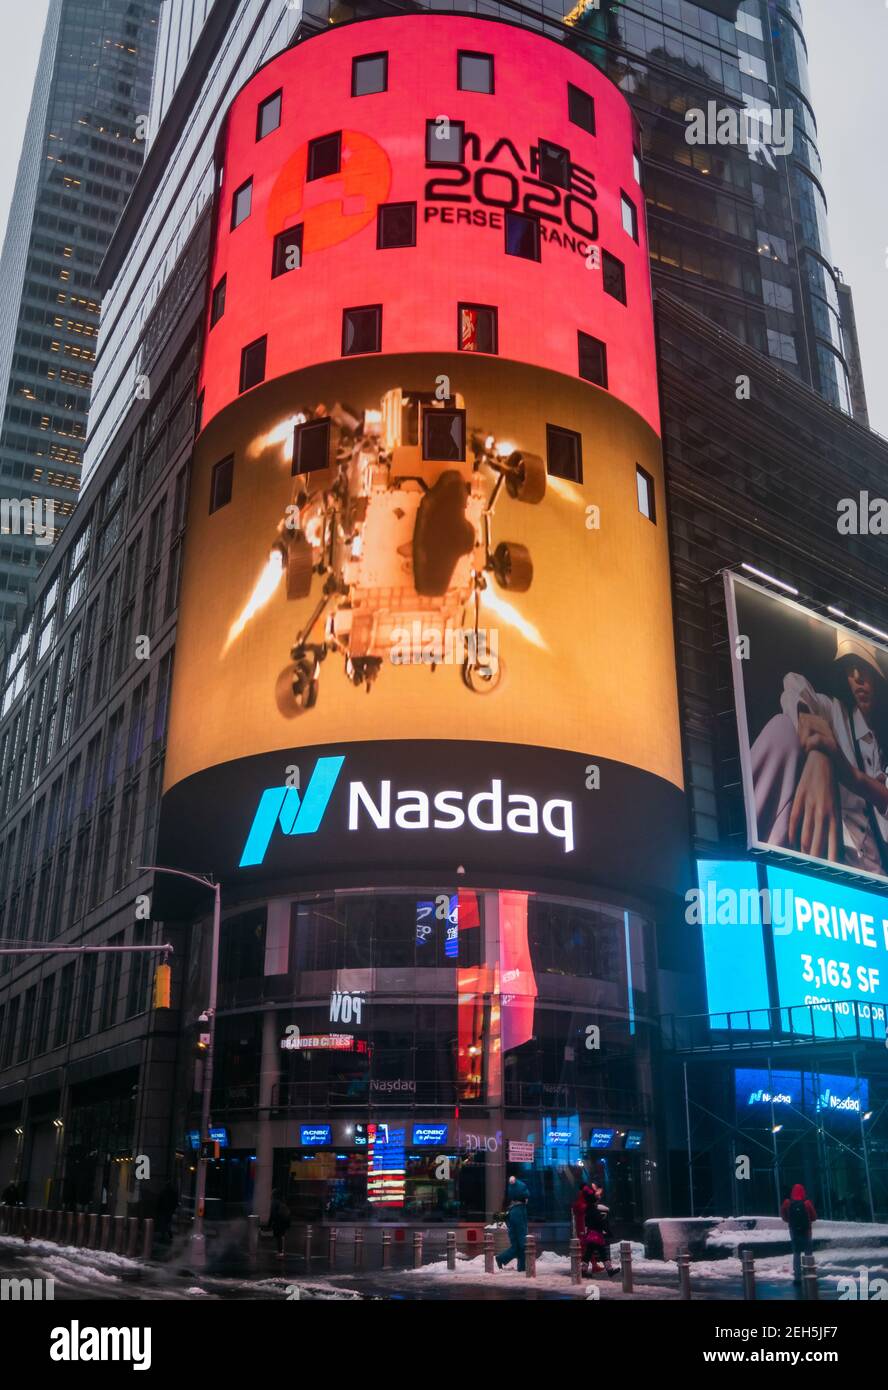 New York, USA. 18th Feb 2021. The news banner on the Nasdaq MarketSite video board celebrates the successful landing of the NASA Mars Perseverance rover on the surface of the Red Planet February 18, 2021 in New York City, New York. Perseverance will search for signs of ancient microbial life. Credit: Planetpix/Alamy Live News Stock Photo